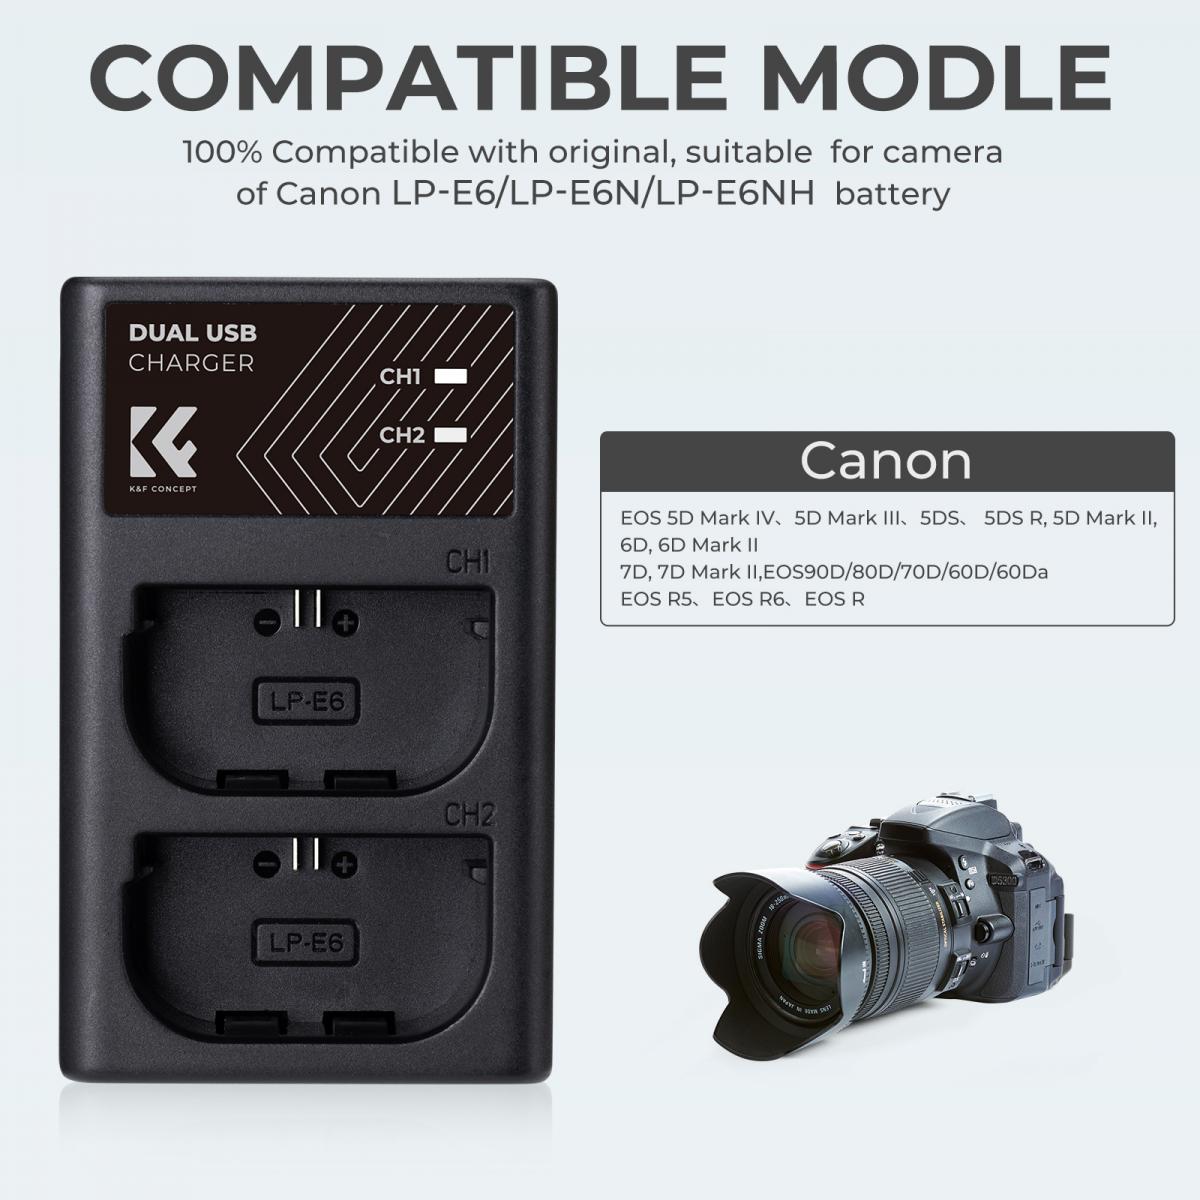 K&F Concept Canon LP-E6NH dual slot battery charger